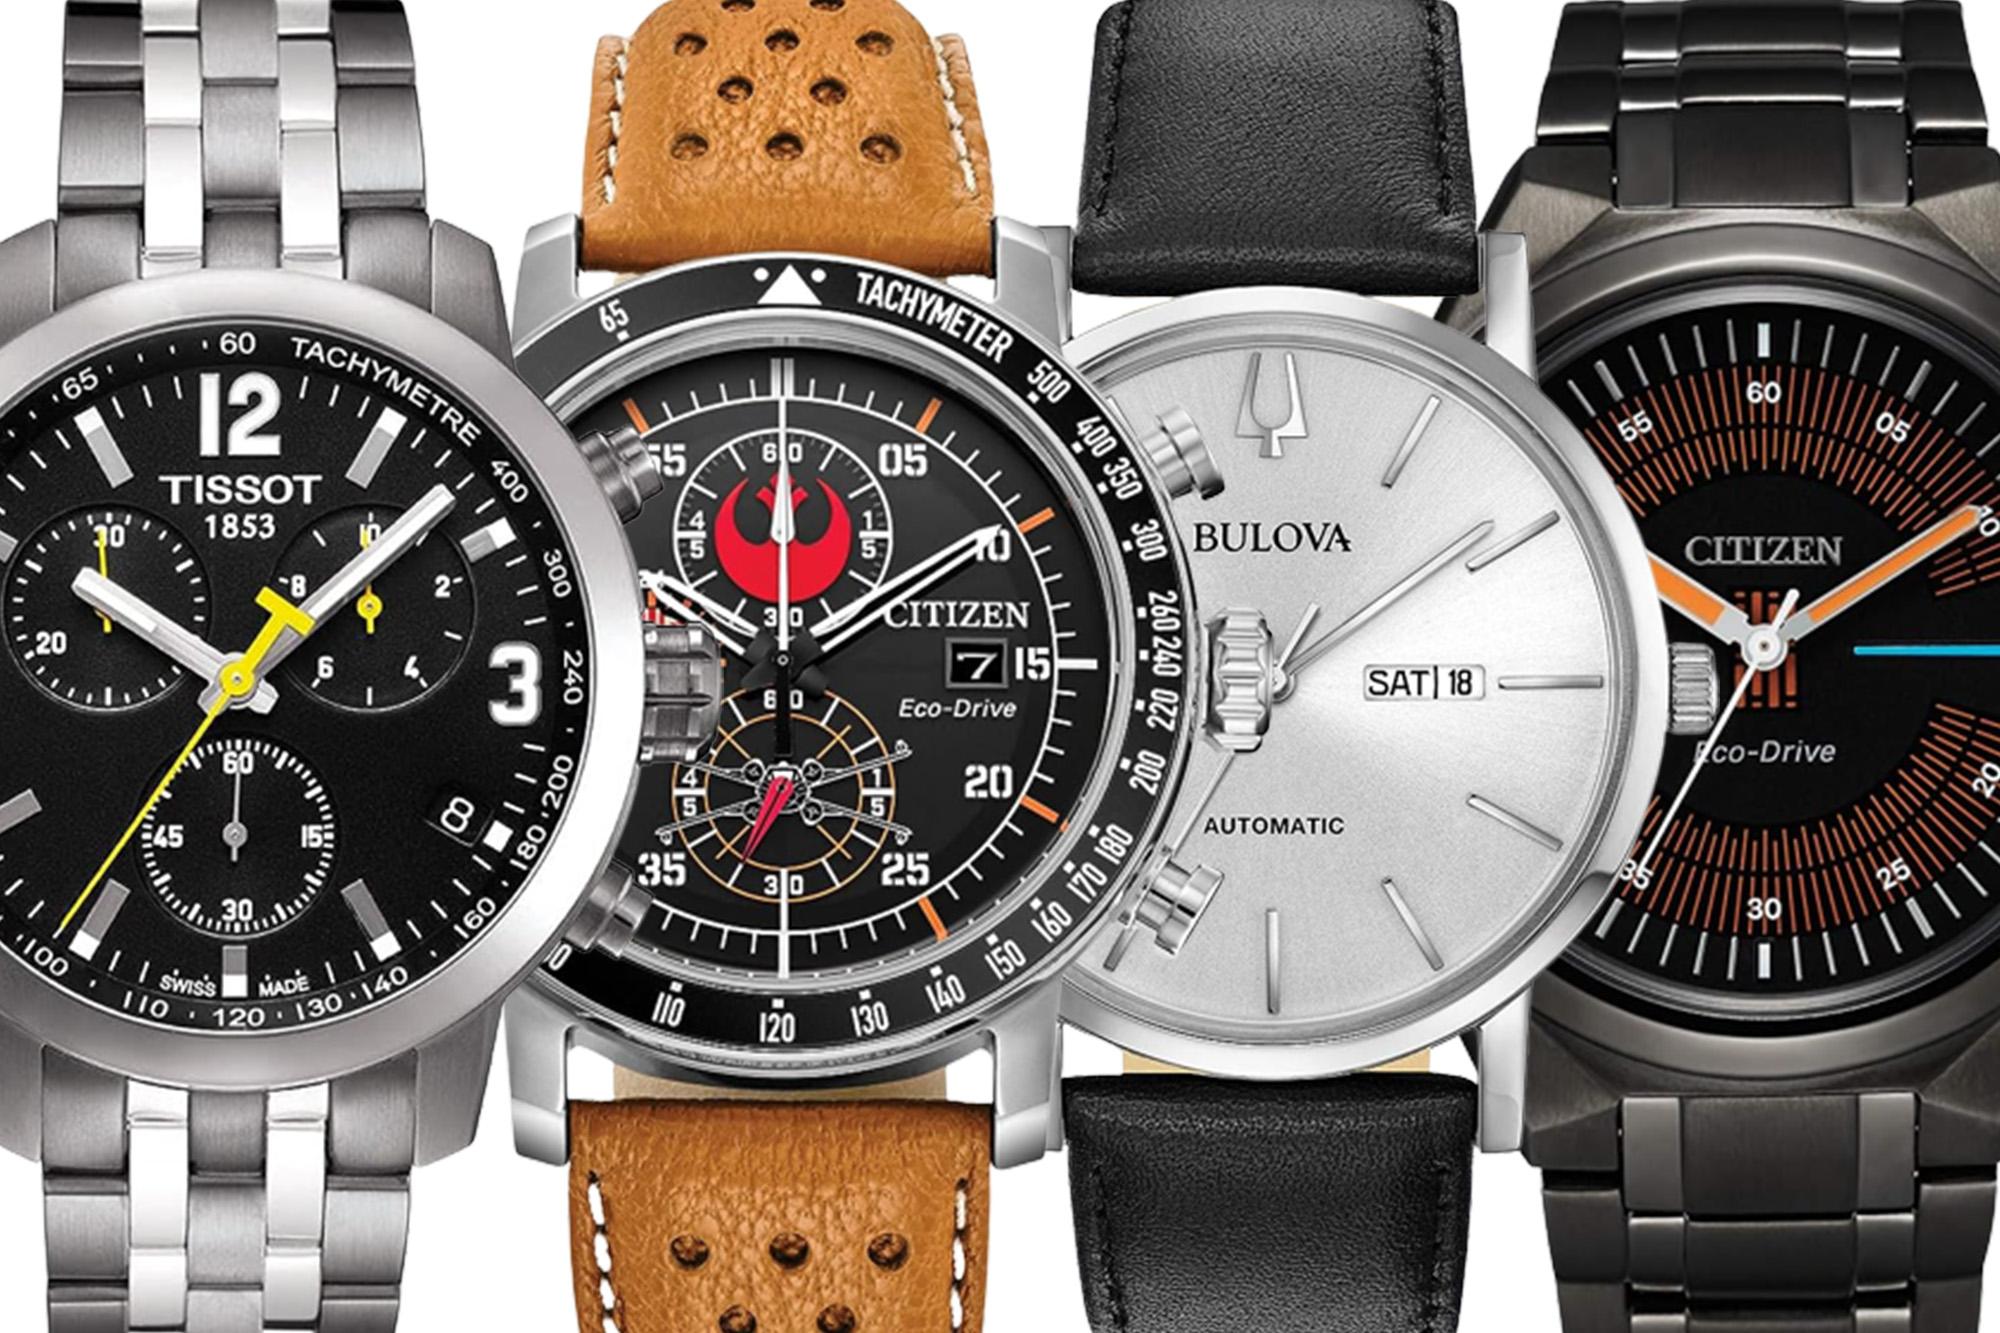 Update your fall wardrobe with up to 50% off Citizen, Timex, and Bulova watches at Amazon